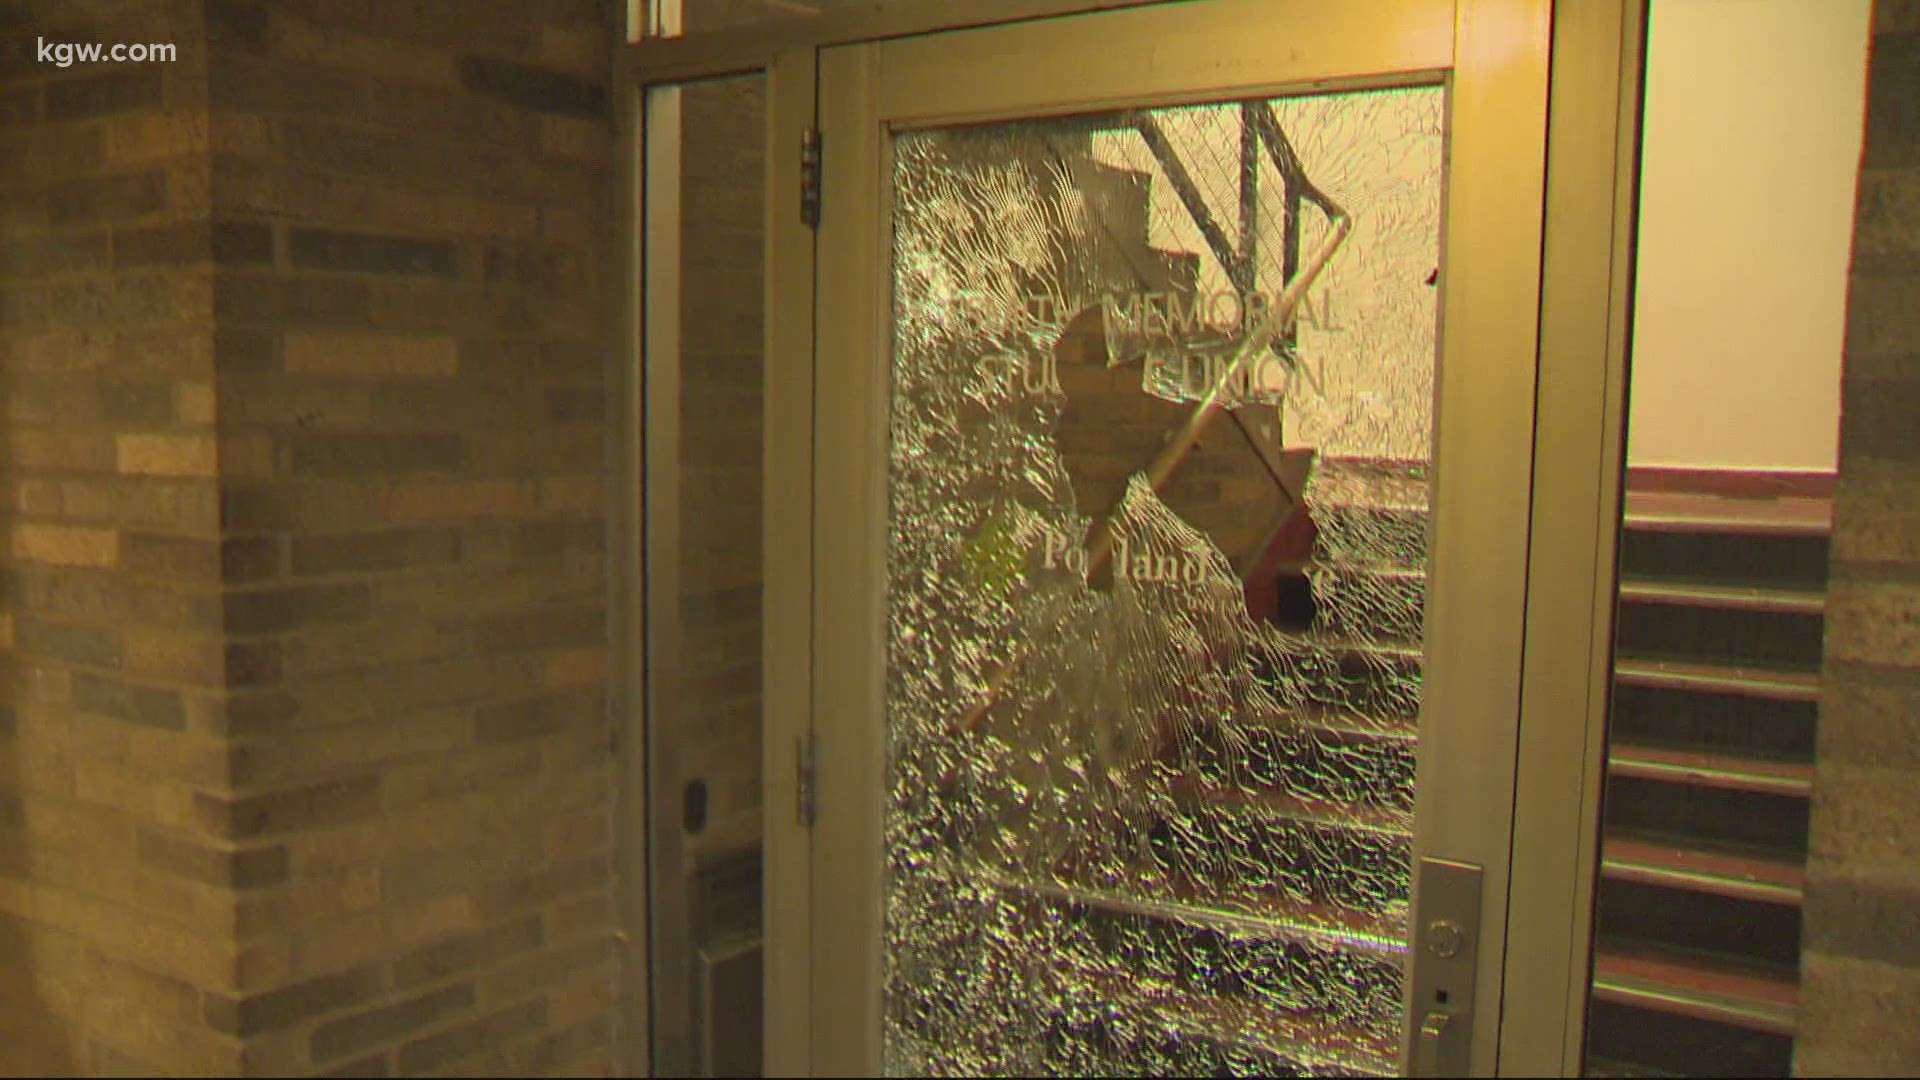 Multnomah County Sheriff's Office said that individuals in the group smashed windows at the PSU public safety building and a nearby Starbucks.